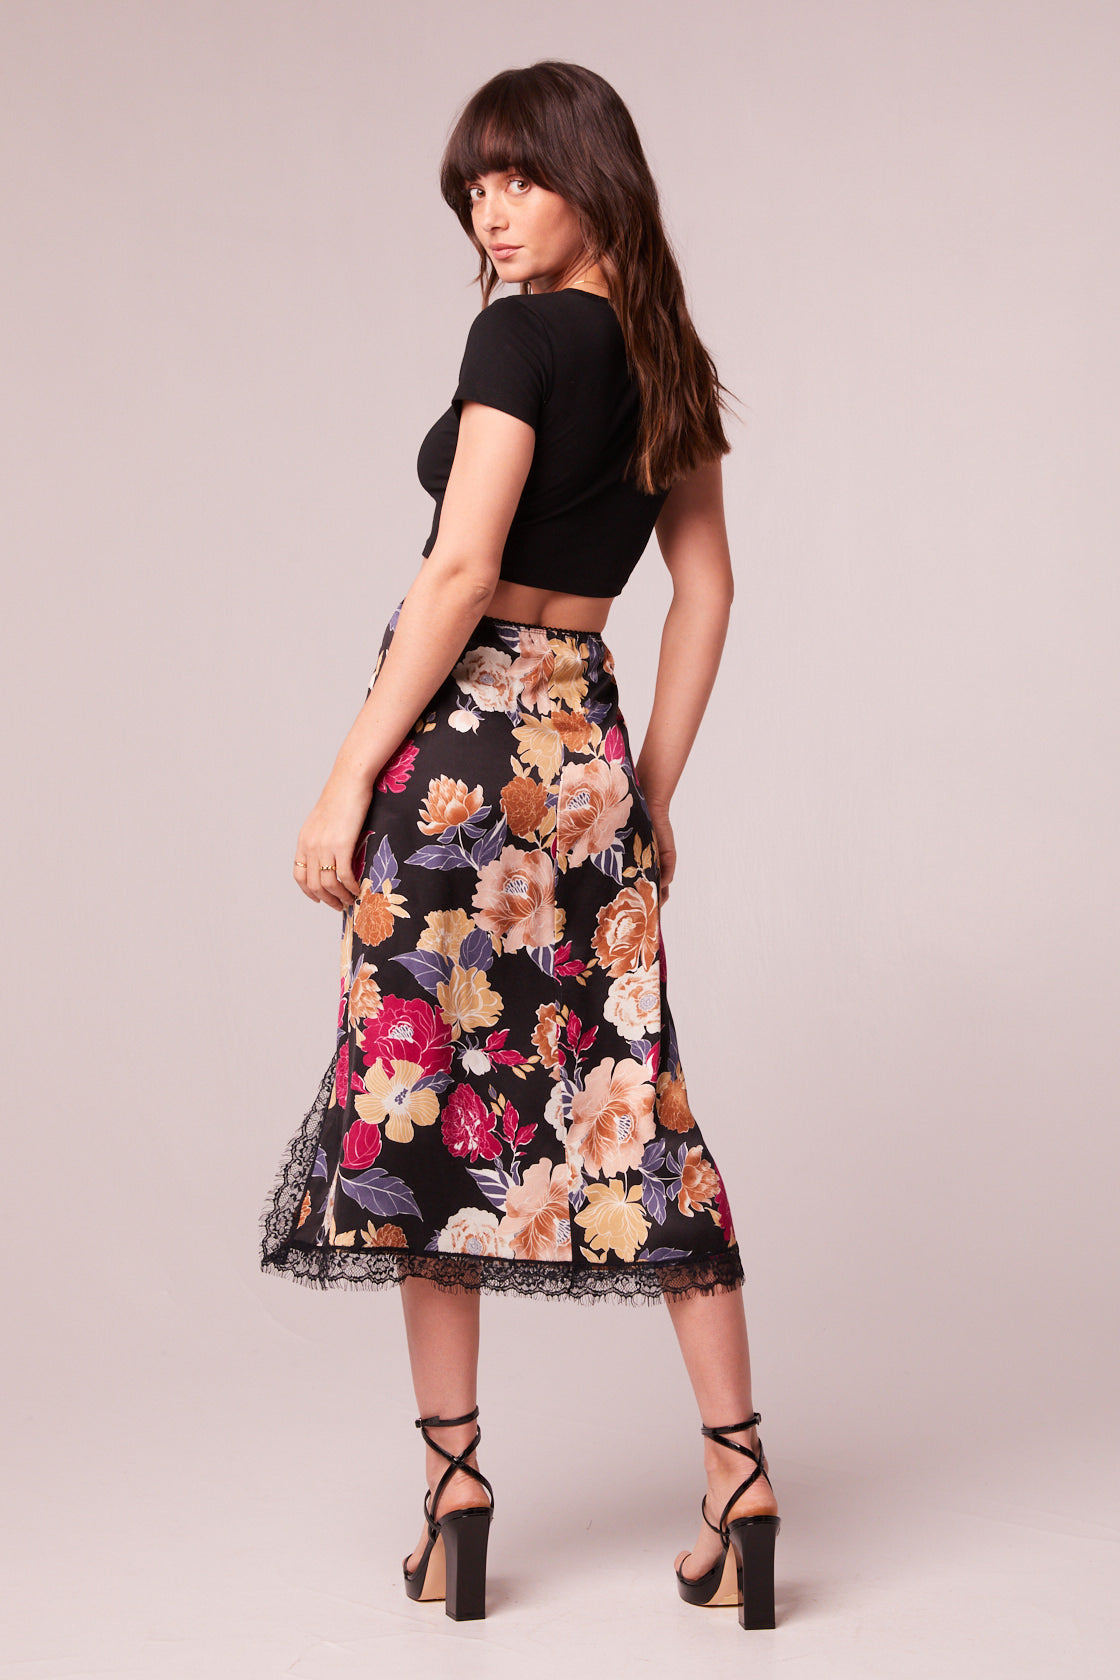 Skirt Floral the Lilou Slip - free band of Black Midi Lace